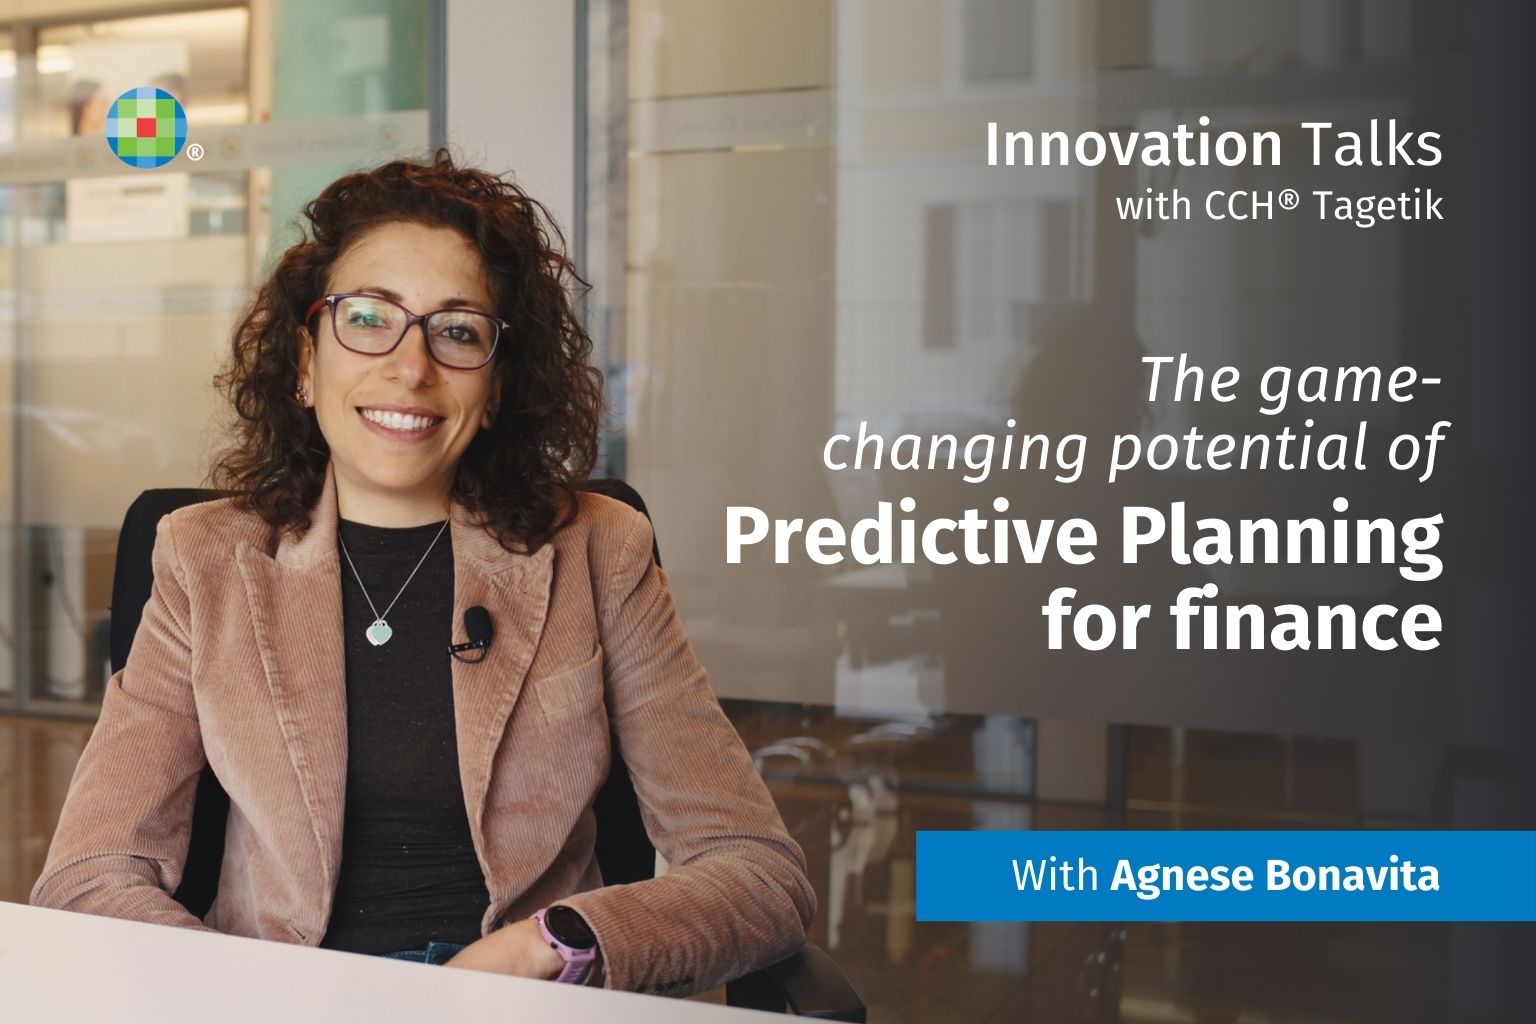 The game-changing potential of Predictive Planning